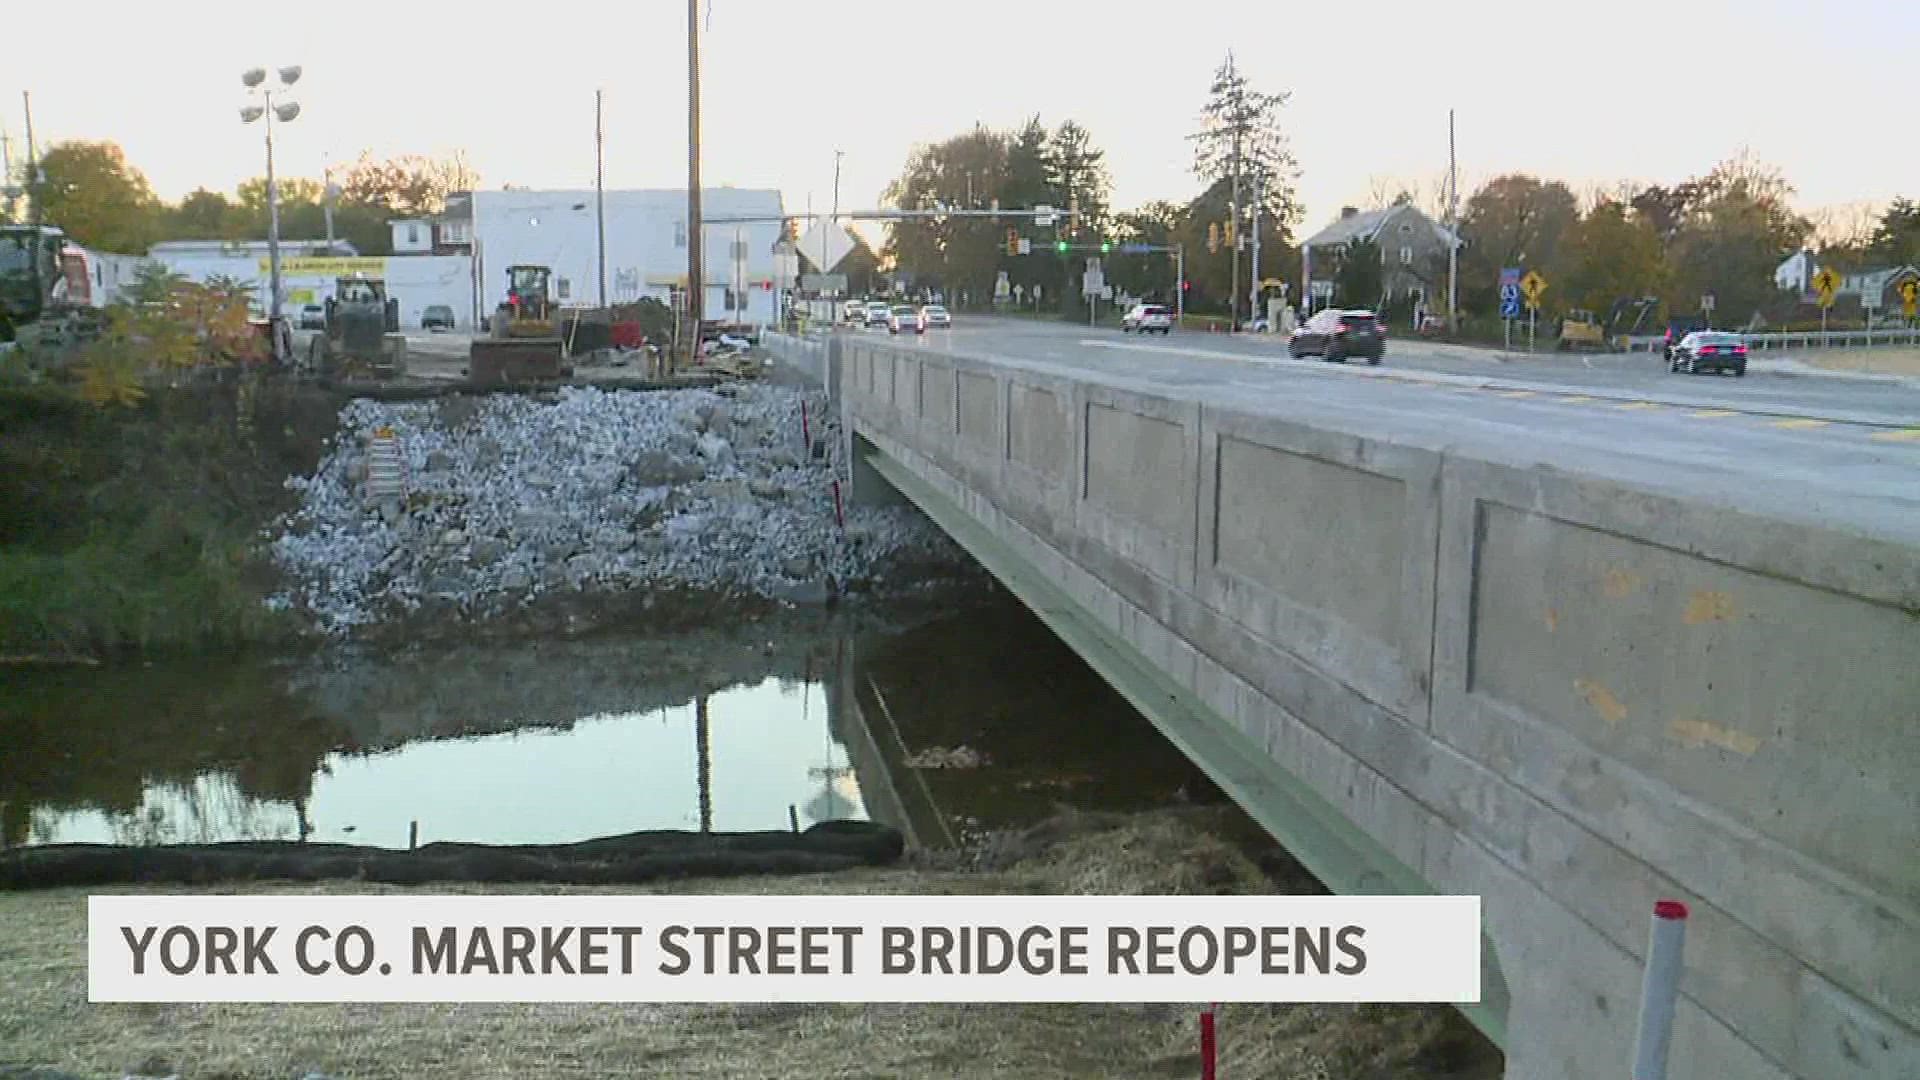 The bridge, which was replaced as part of a larger construction project to update the area, is back in service.